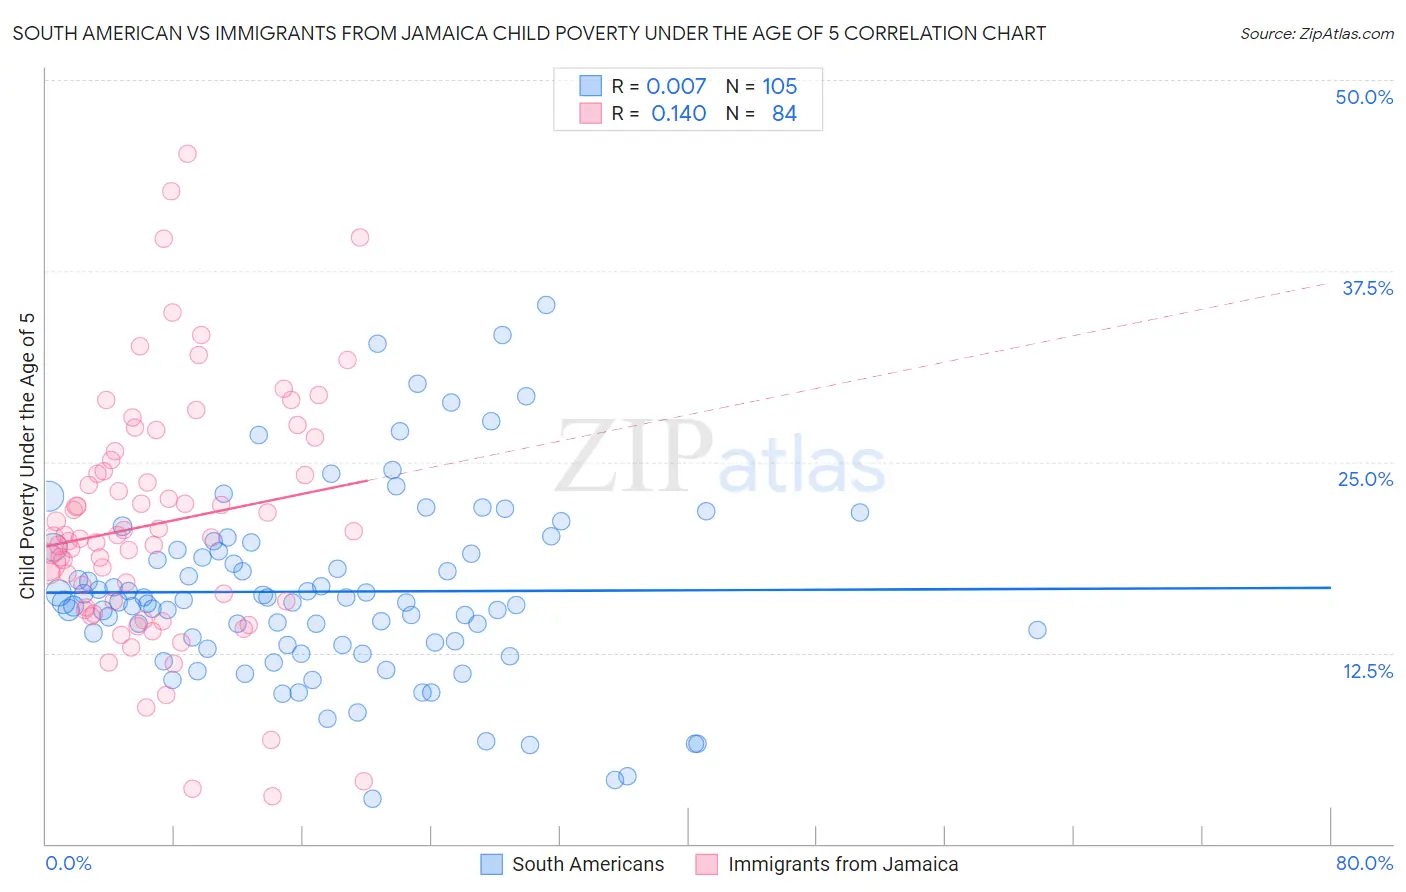 South American vs Immigrants from Jamaica Child Poverty Under the Age of 5